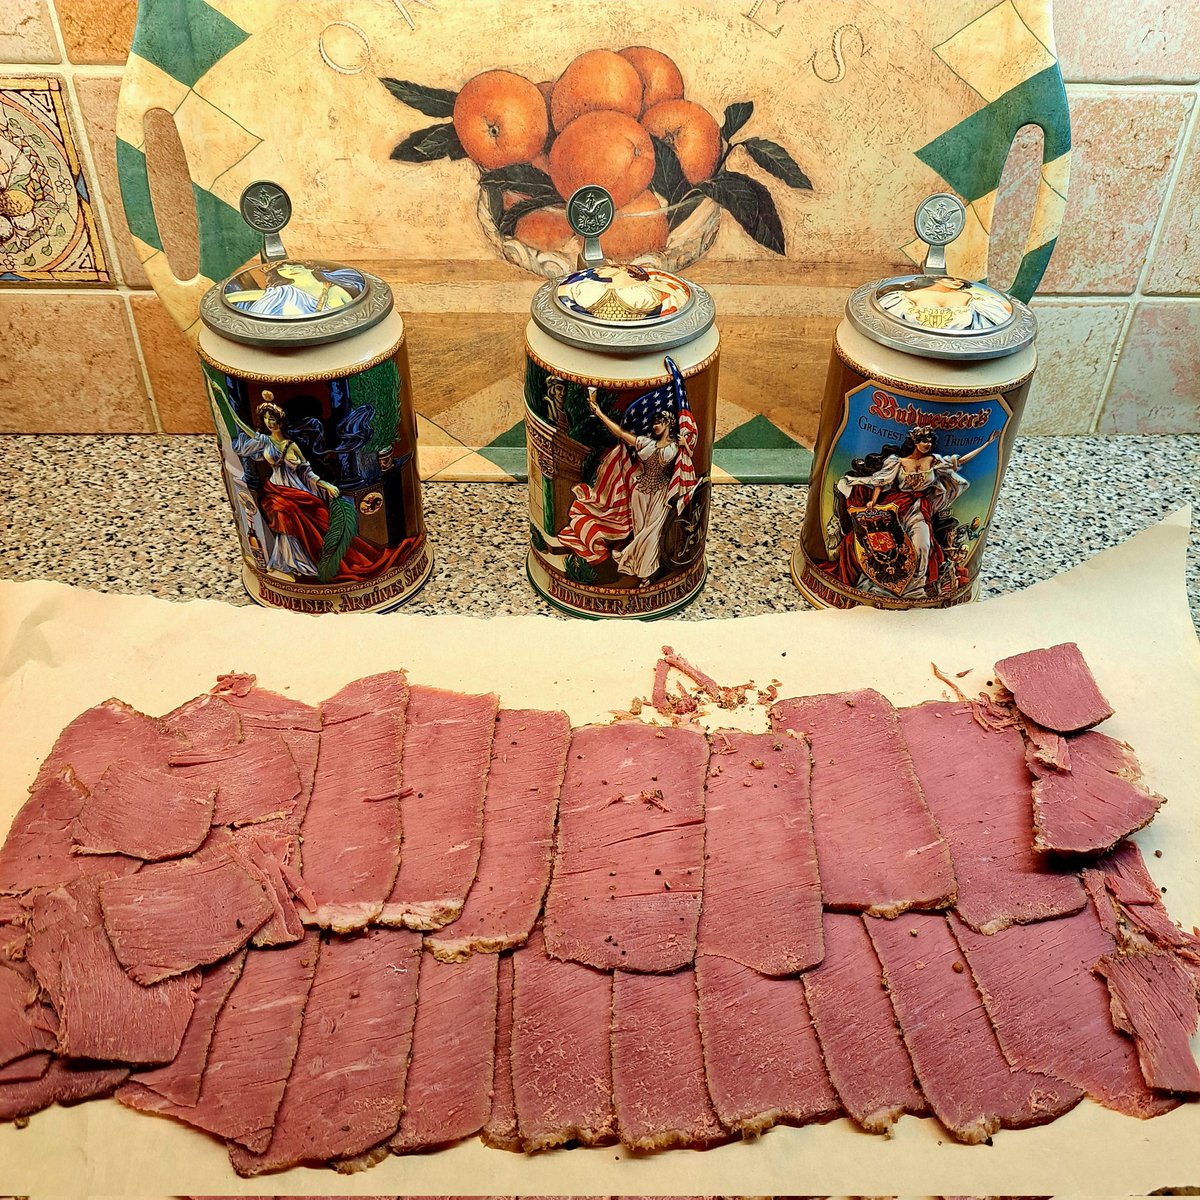 Thinly sliced homemade pastrami... made this one extra spicy and it tastes delicious 😋. Was thinking bout putting some of it into a pastrami ramen dish ,and a pastrami, peppers and mushroom risotto. Washed down with a tankard or three of ale 🍺.